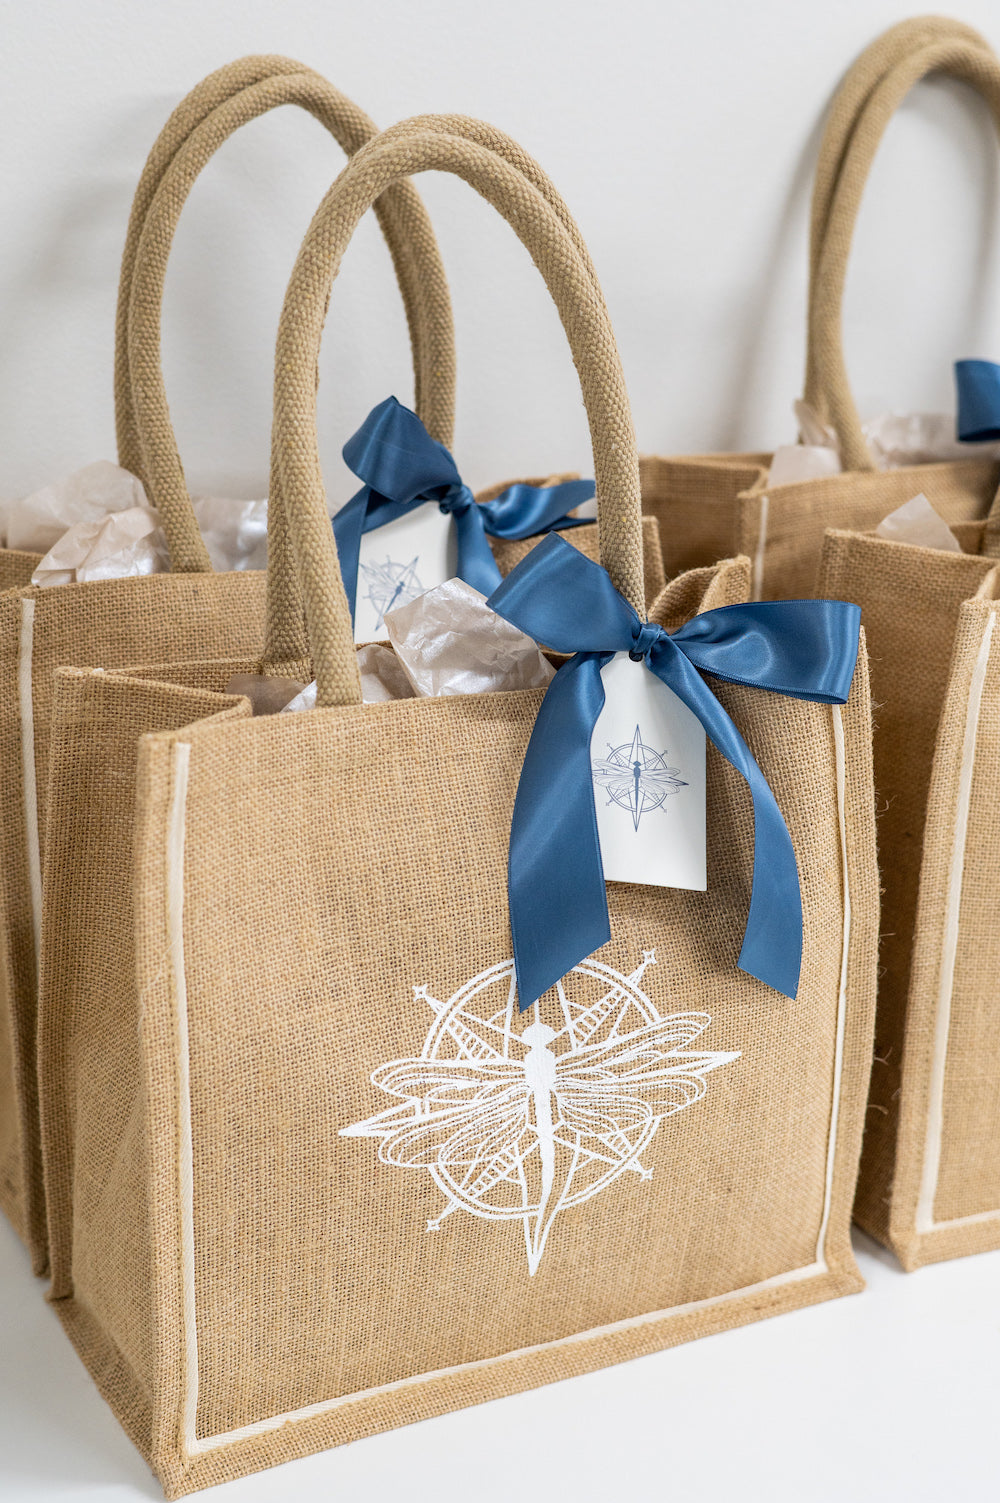 Pacific Northwest Themed Thank You Gift Bags curated gift by Marigold & Grey